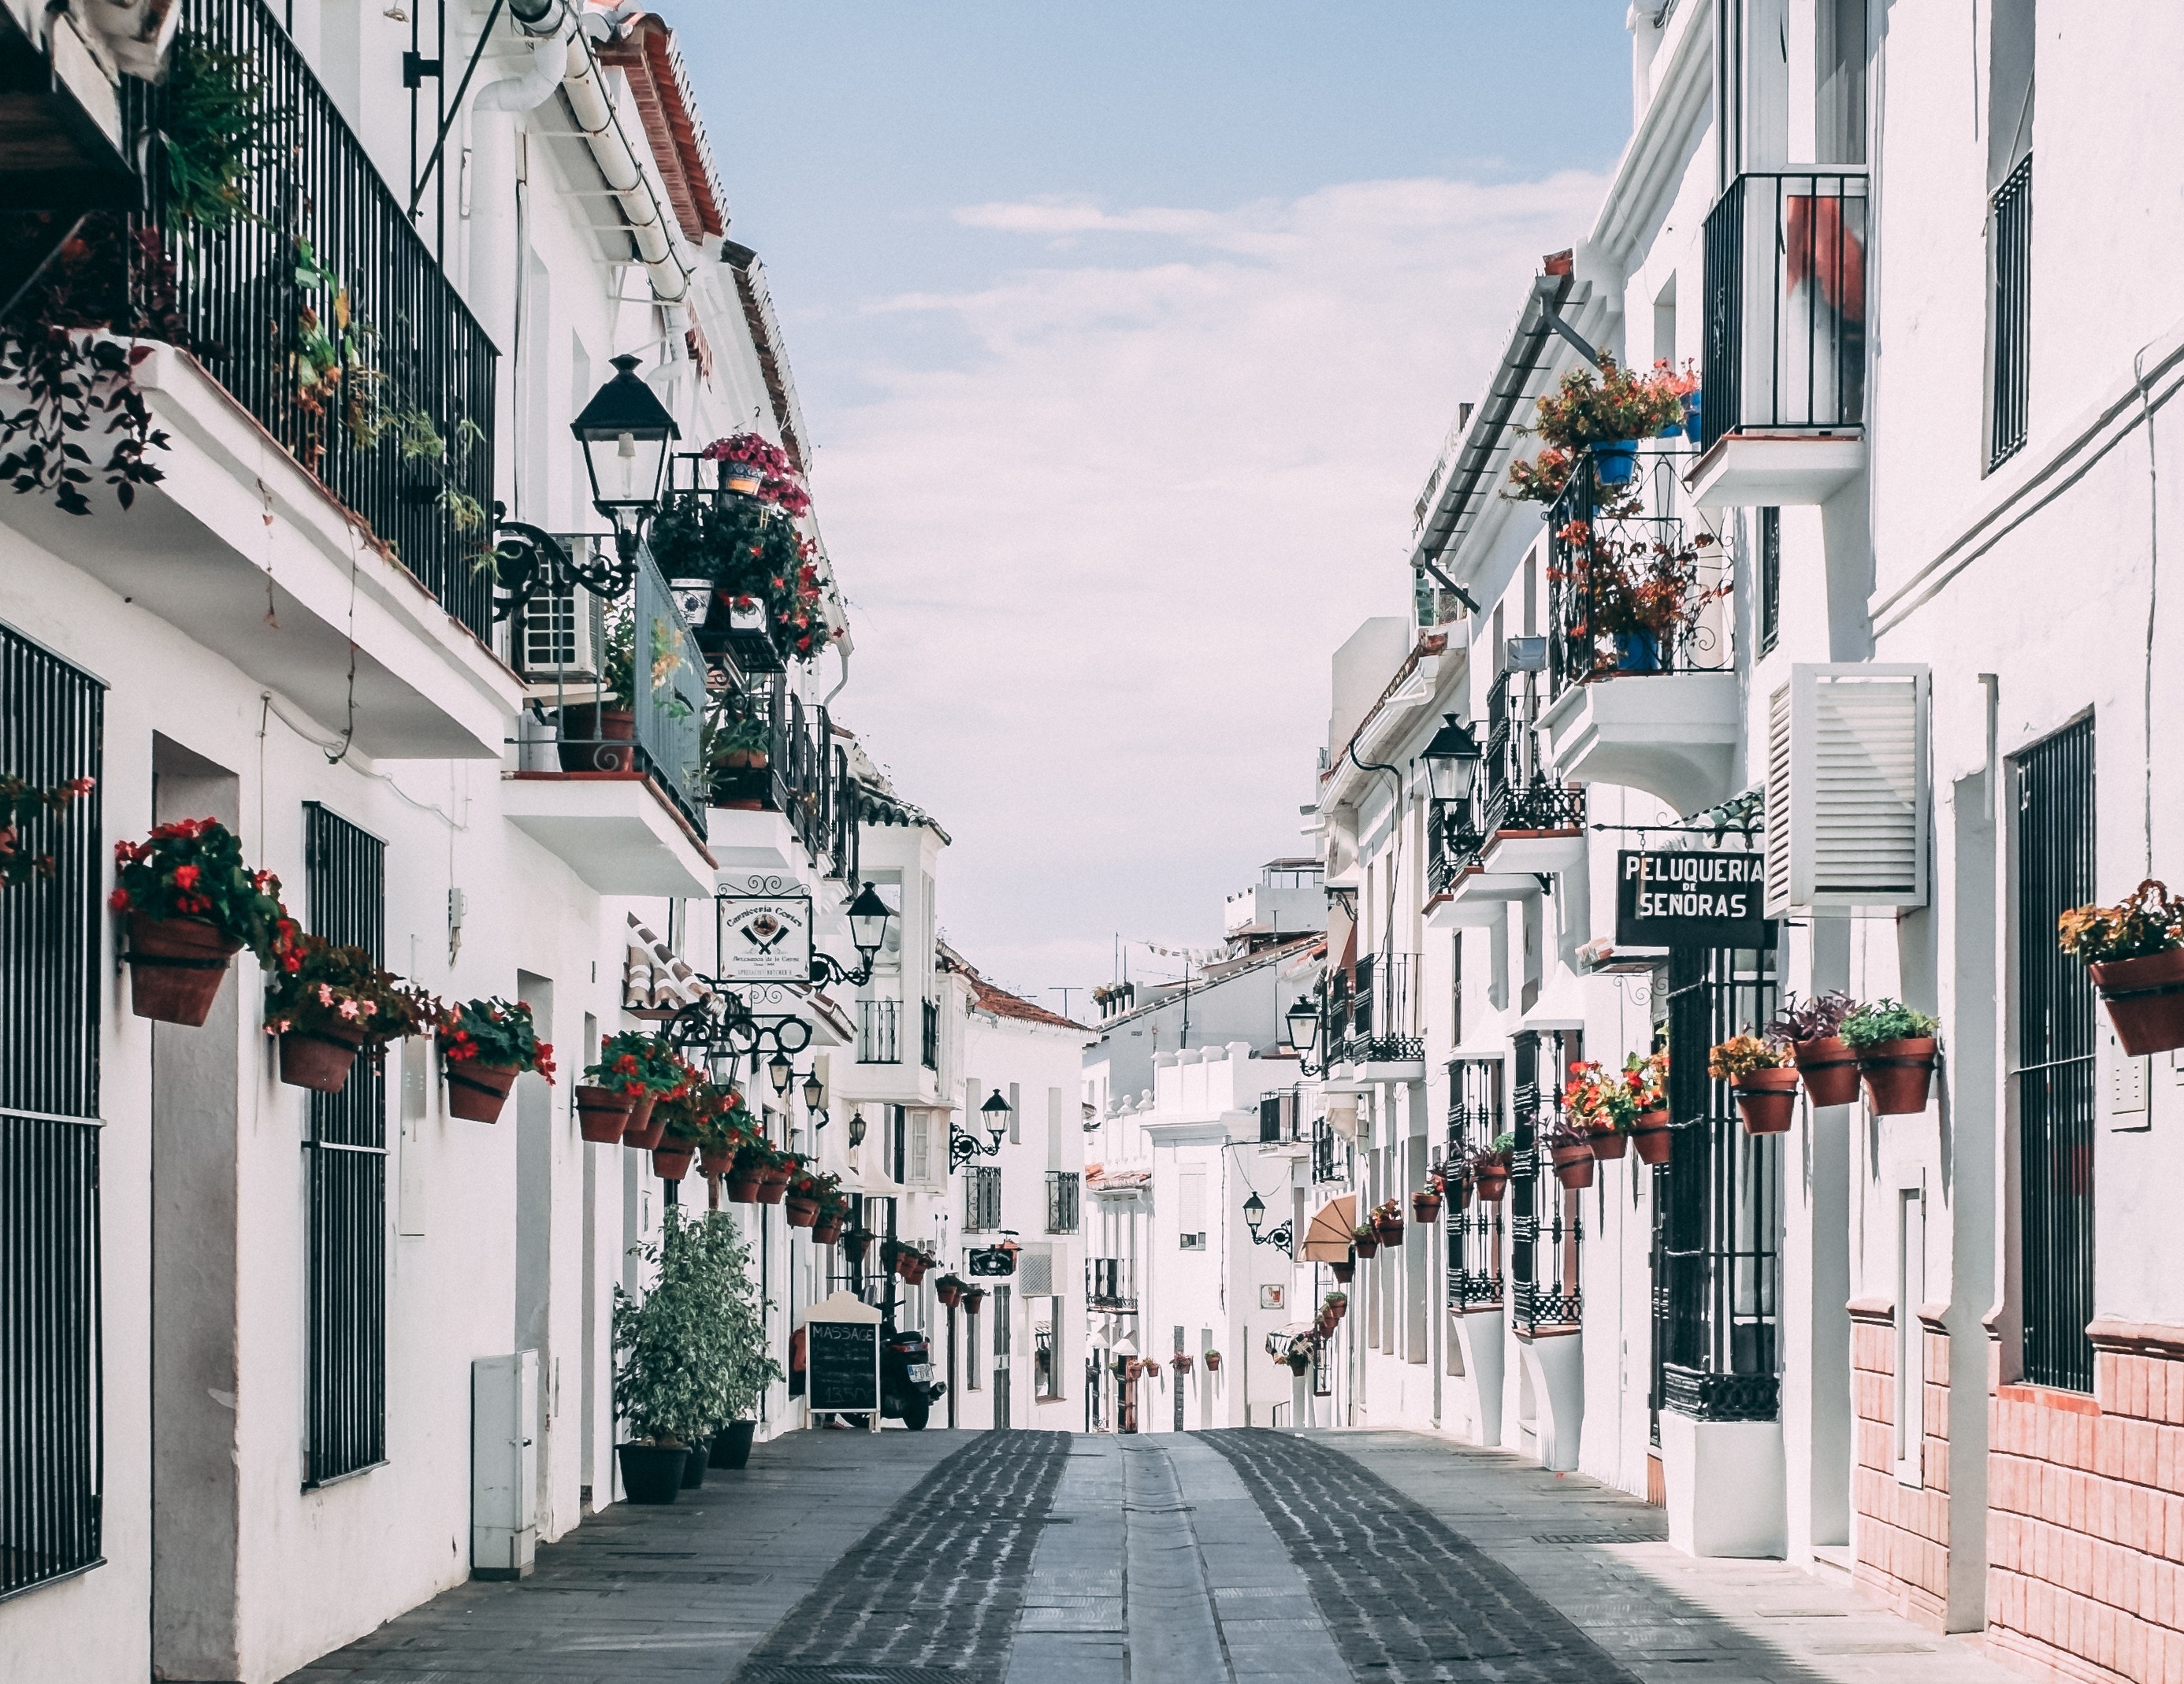 Deal Alert: Fly To Spain’s Costa del Sol For $381 Round-Trip